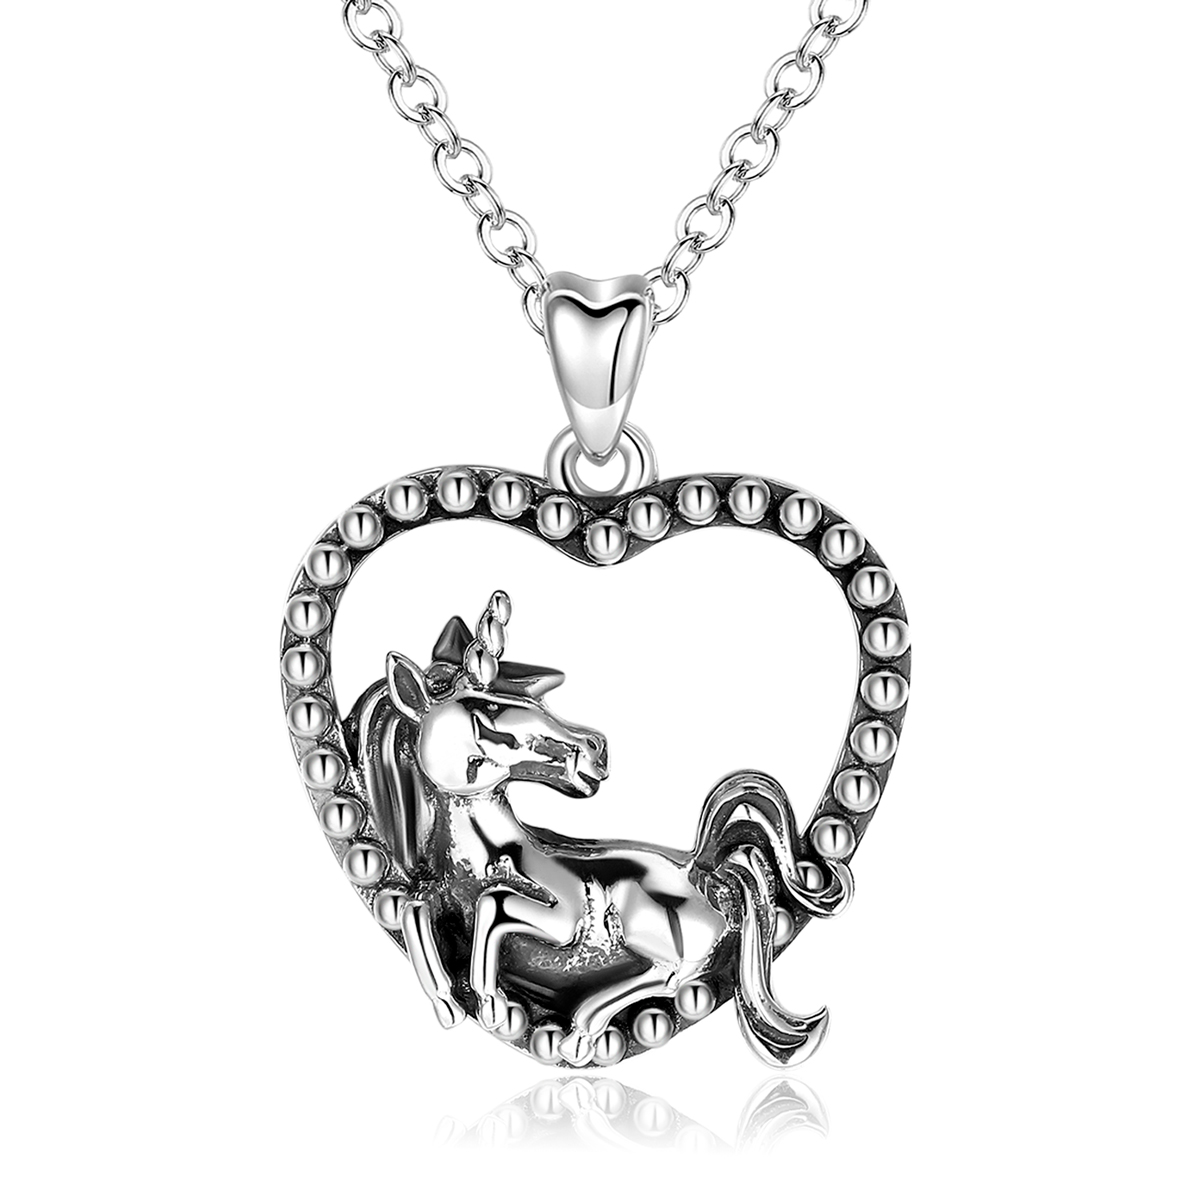 Merryshine 925 Sterling Silver Vintage Heart and Horse Pendant Necklace